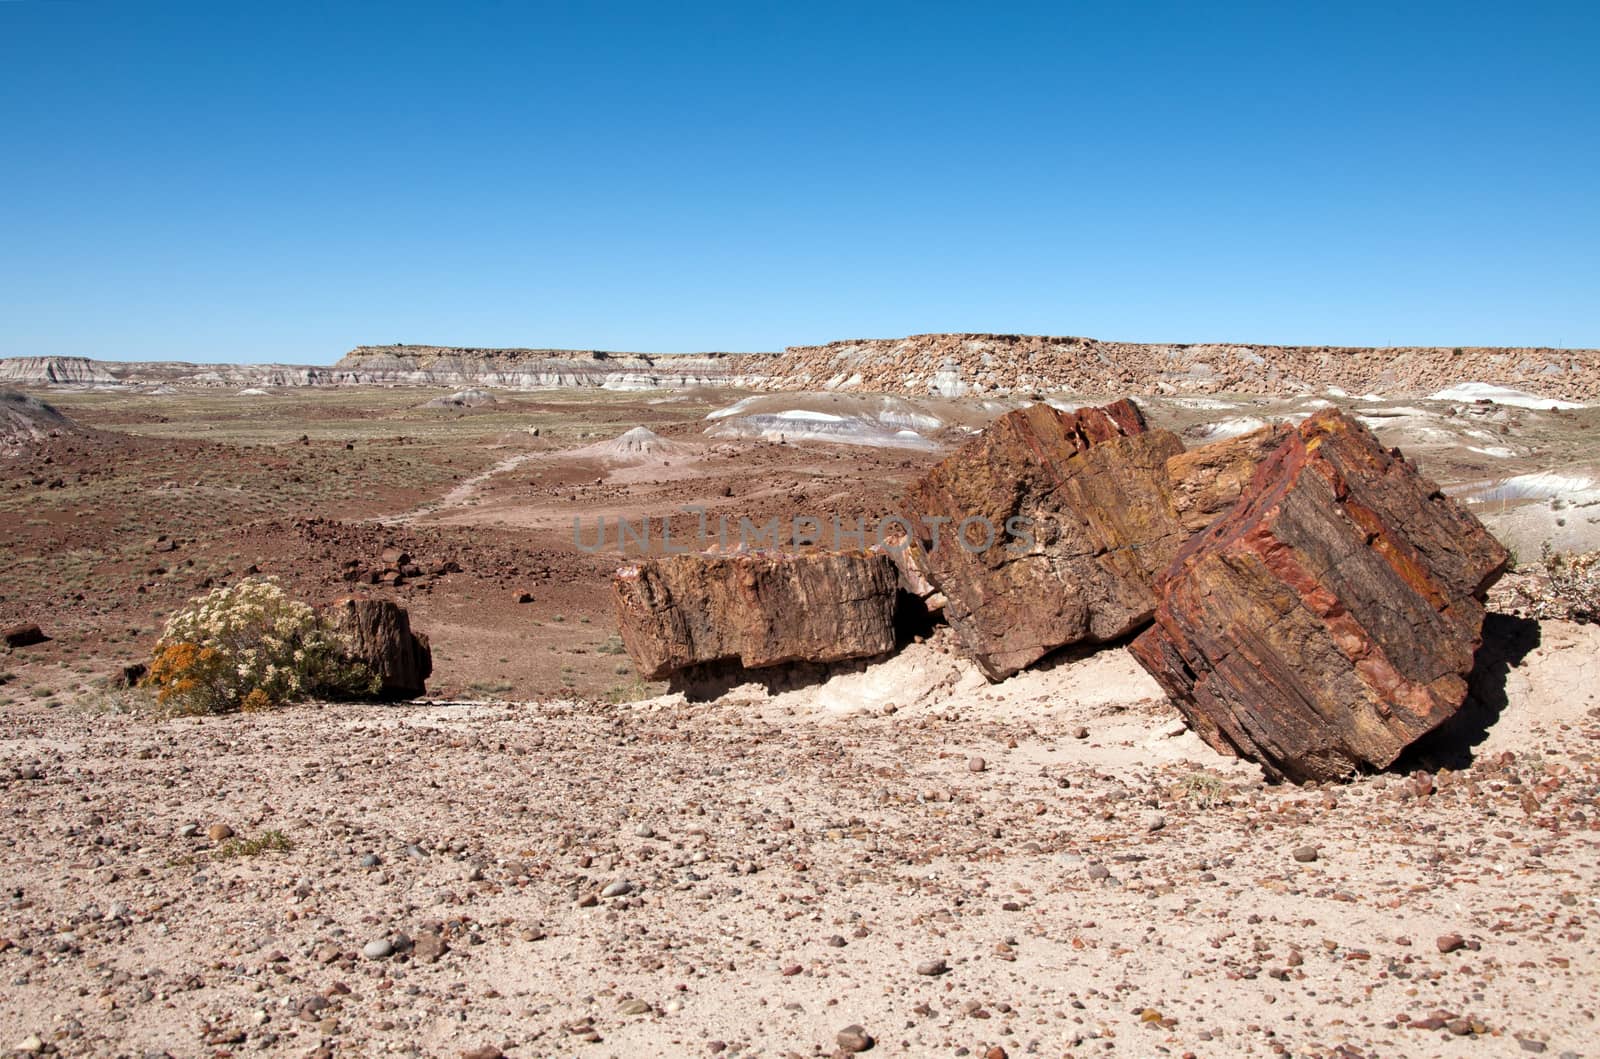 Petrified logs in the painted desert.